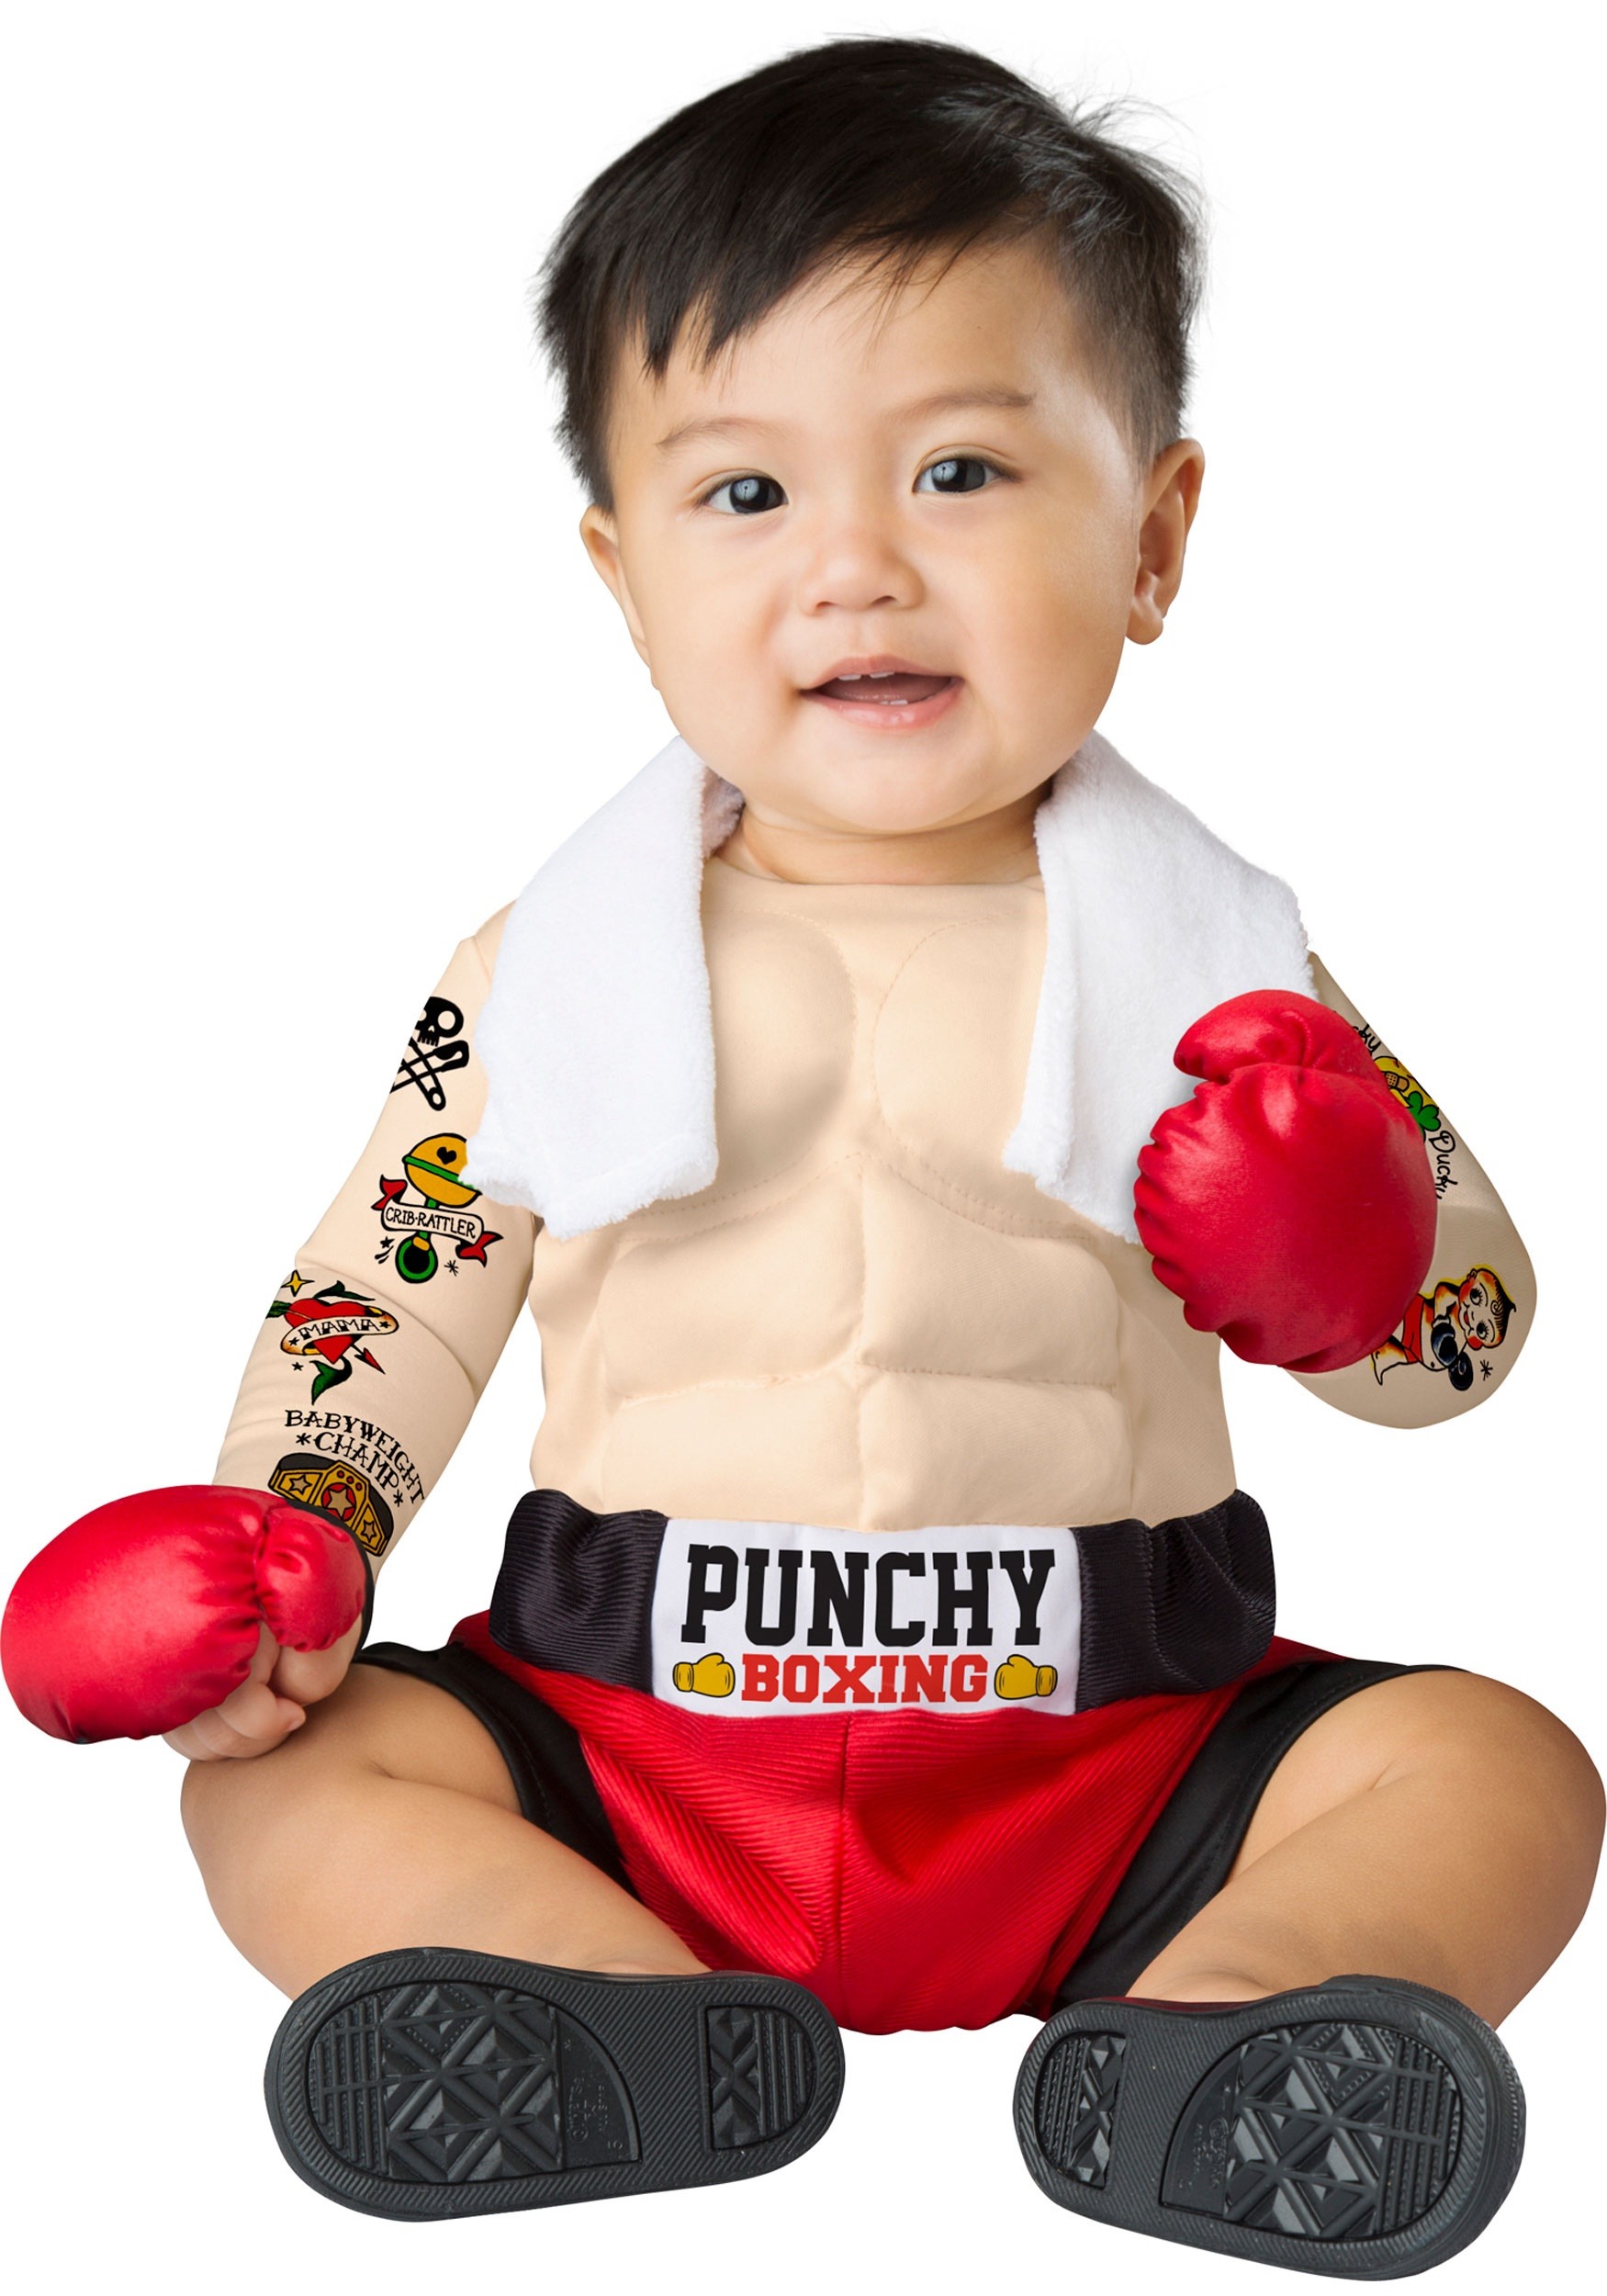 Boxer Costume For Infants , Baby Boxer Costume W/ Jumpsuit